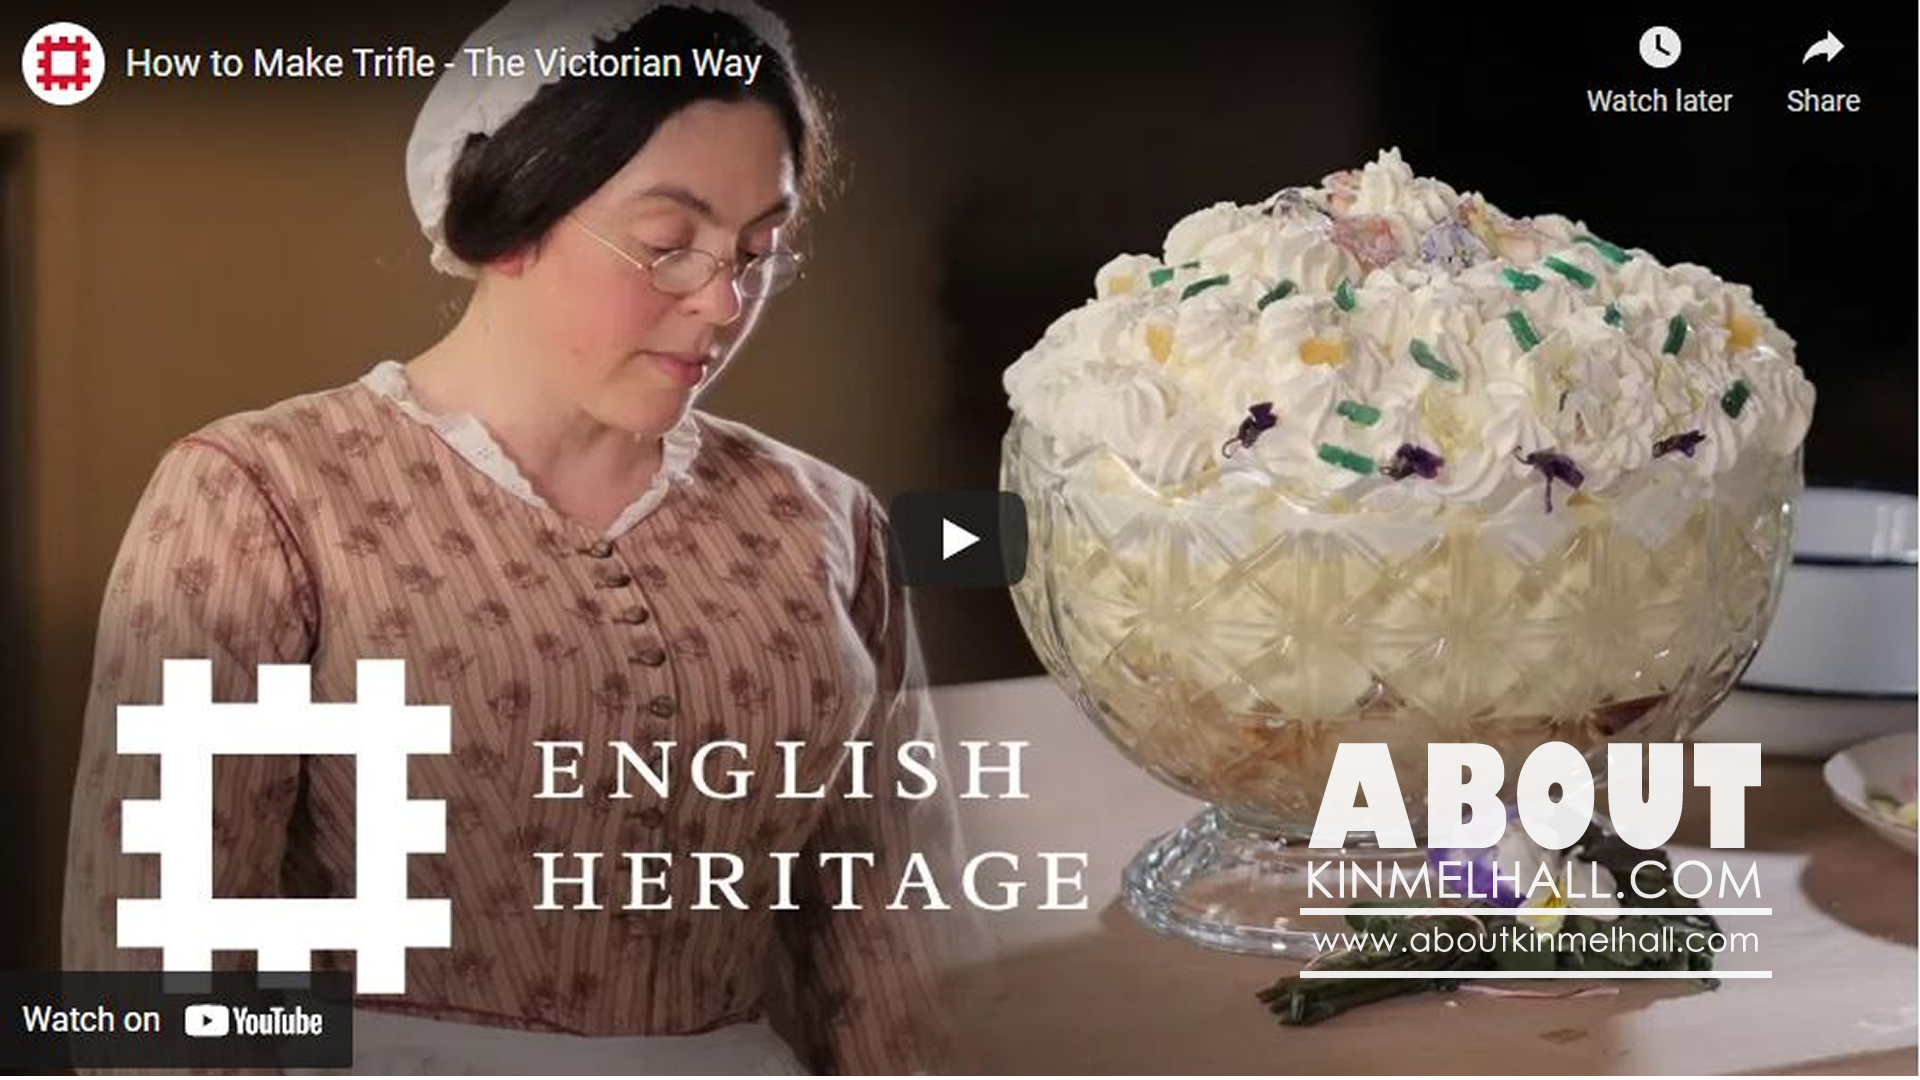 Education Resources - Victorian Cookery Session 17 by English Heritage